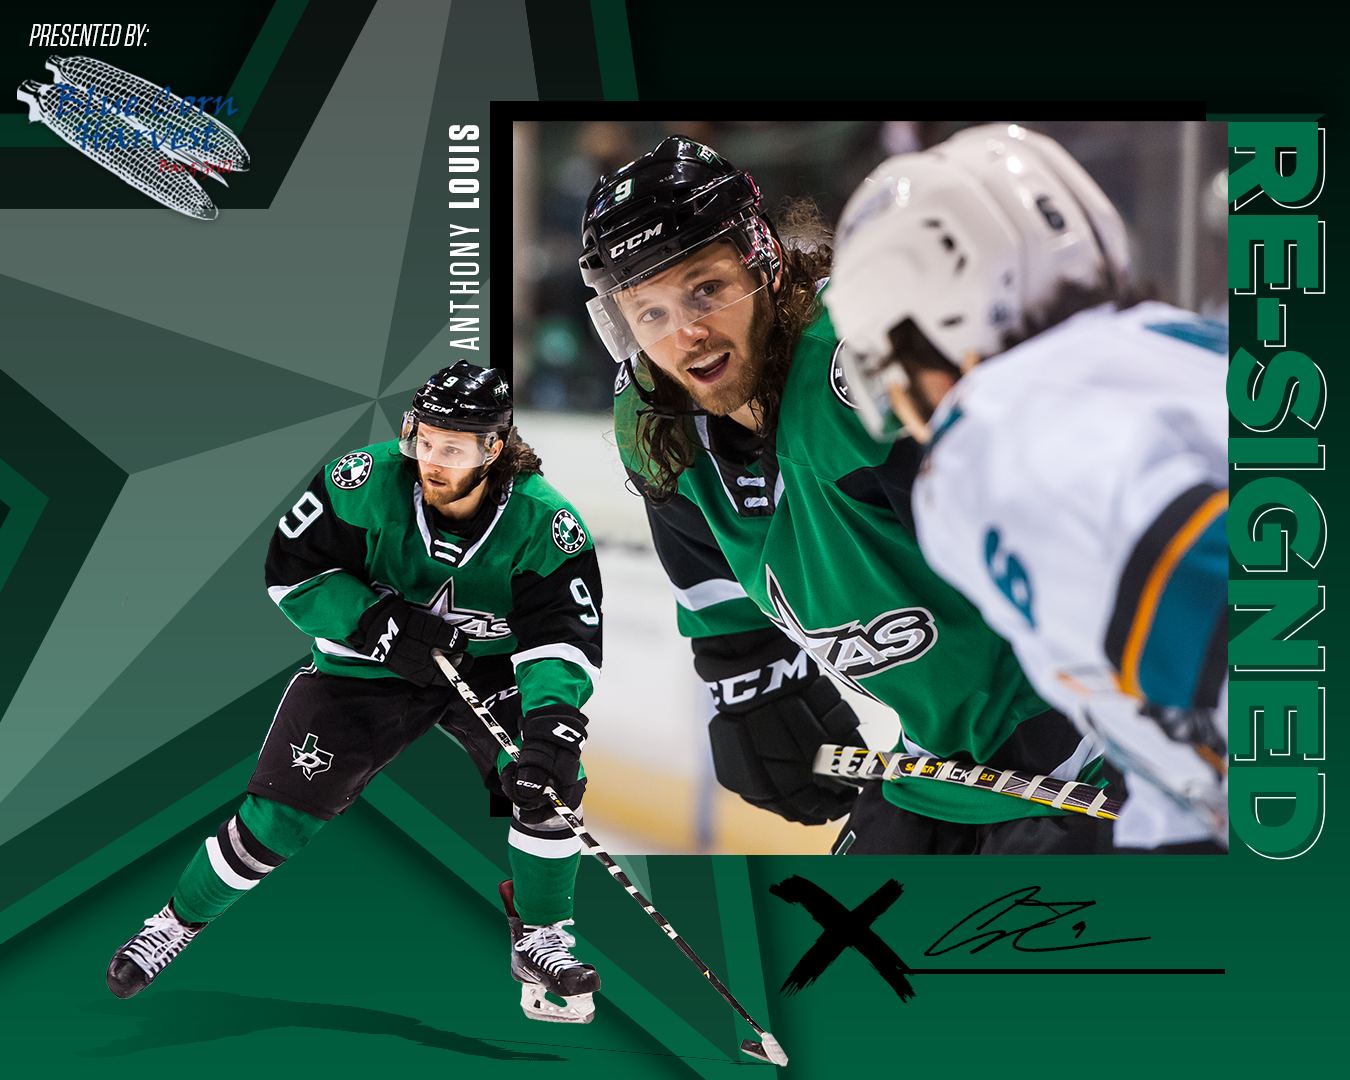 20210609_Anthony Louis Re-Signs AHL Deal with Stars Graphic.png